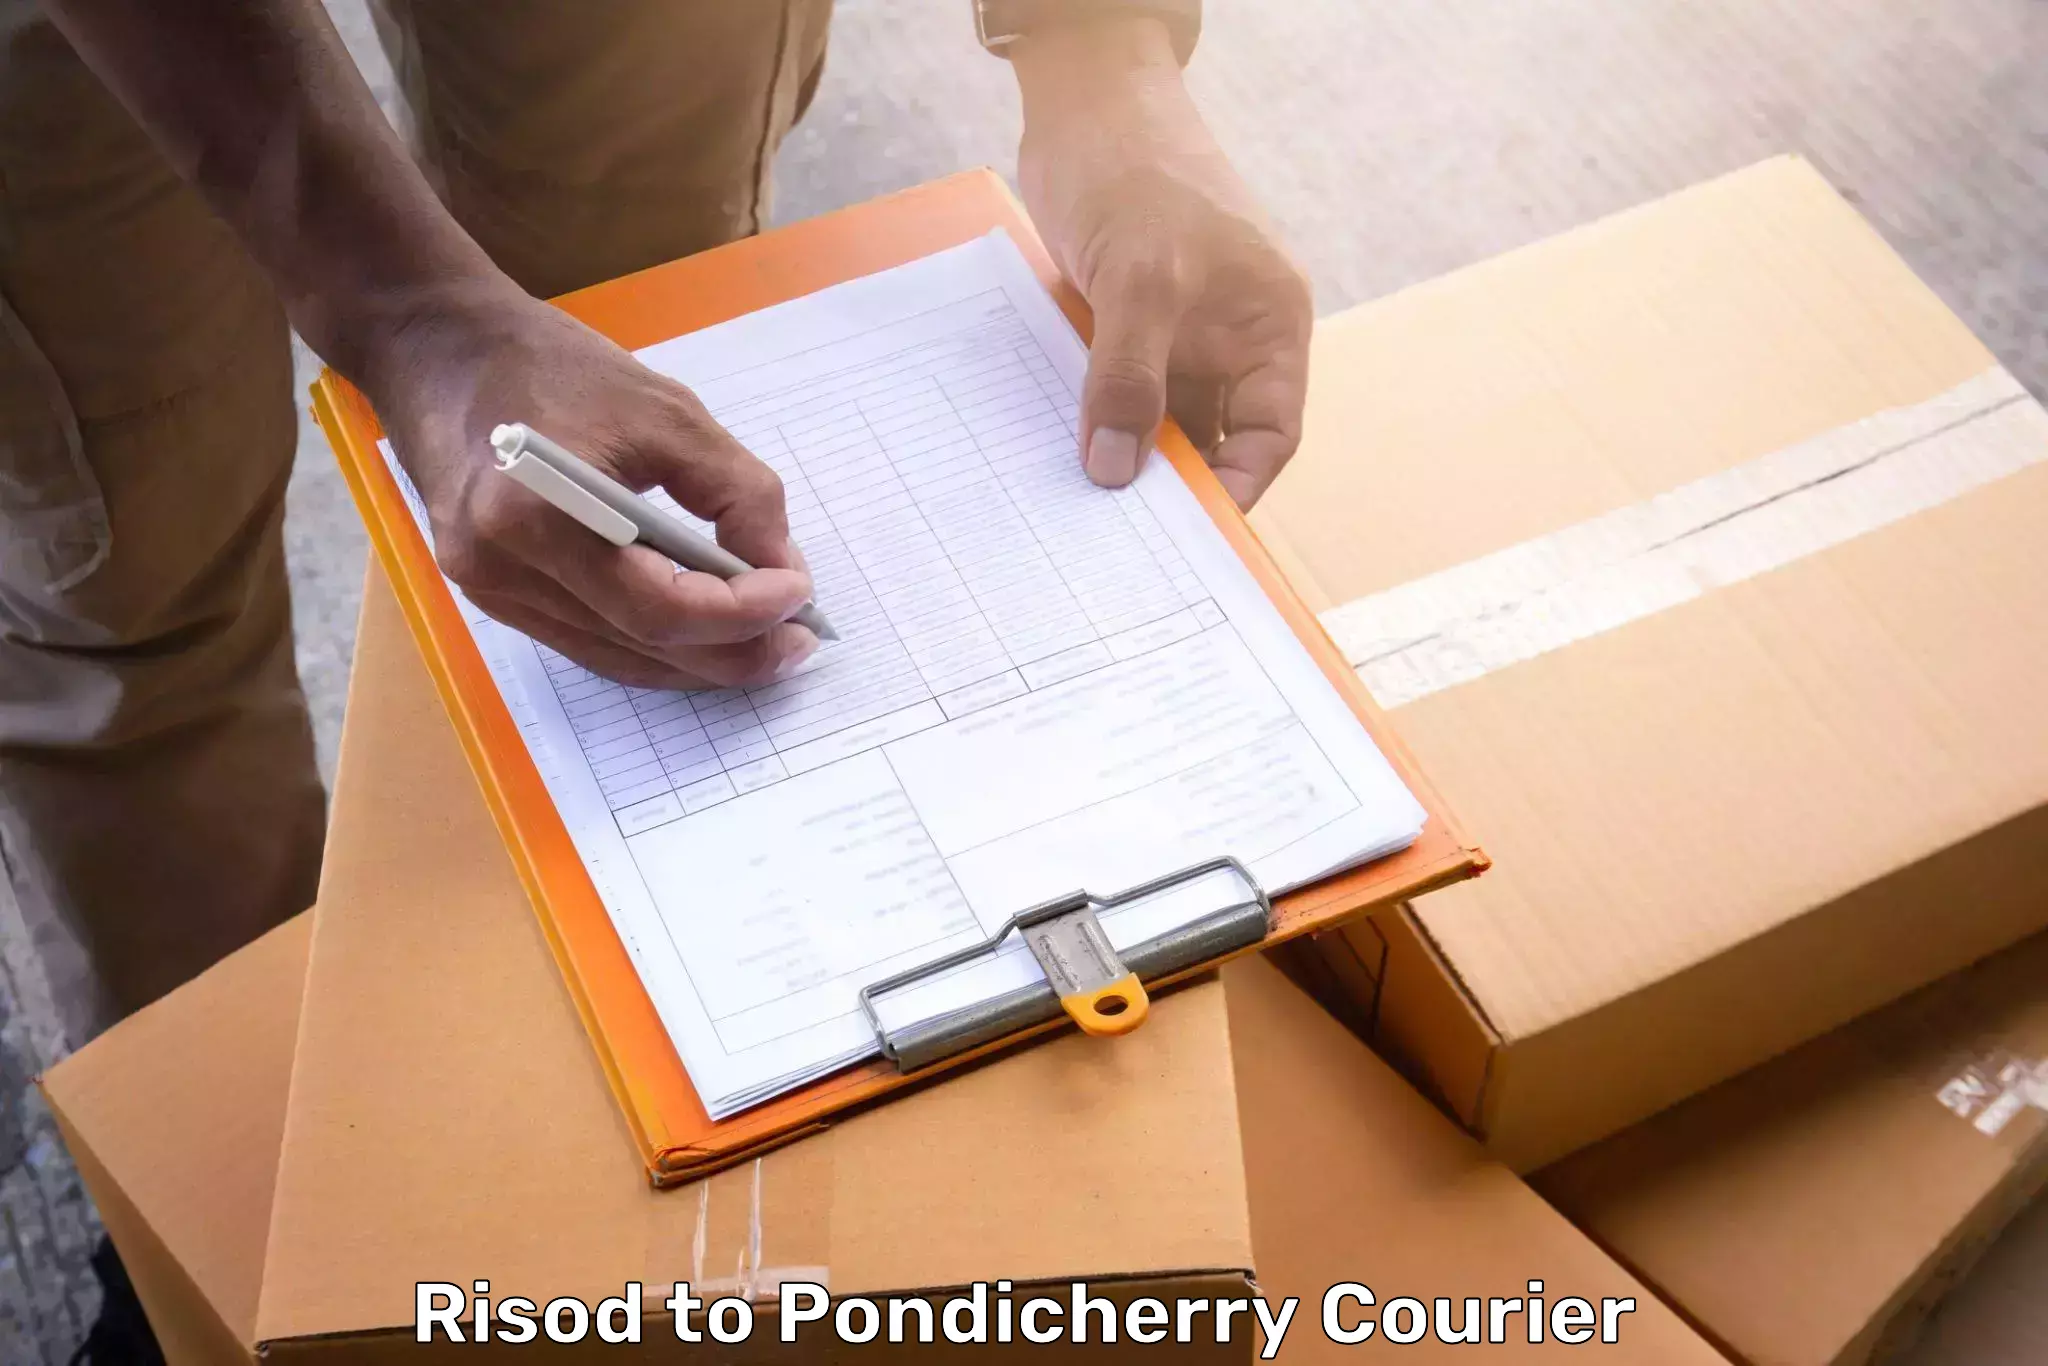 Luggage delivery network Risod to Pondicherry University